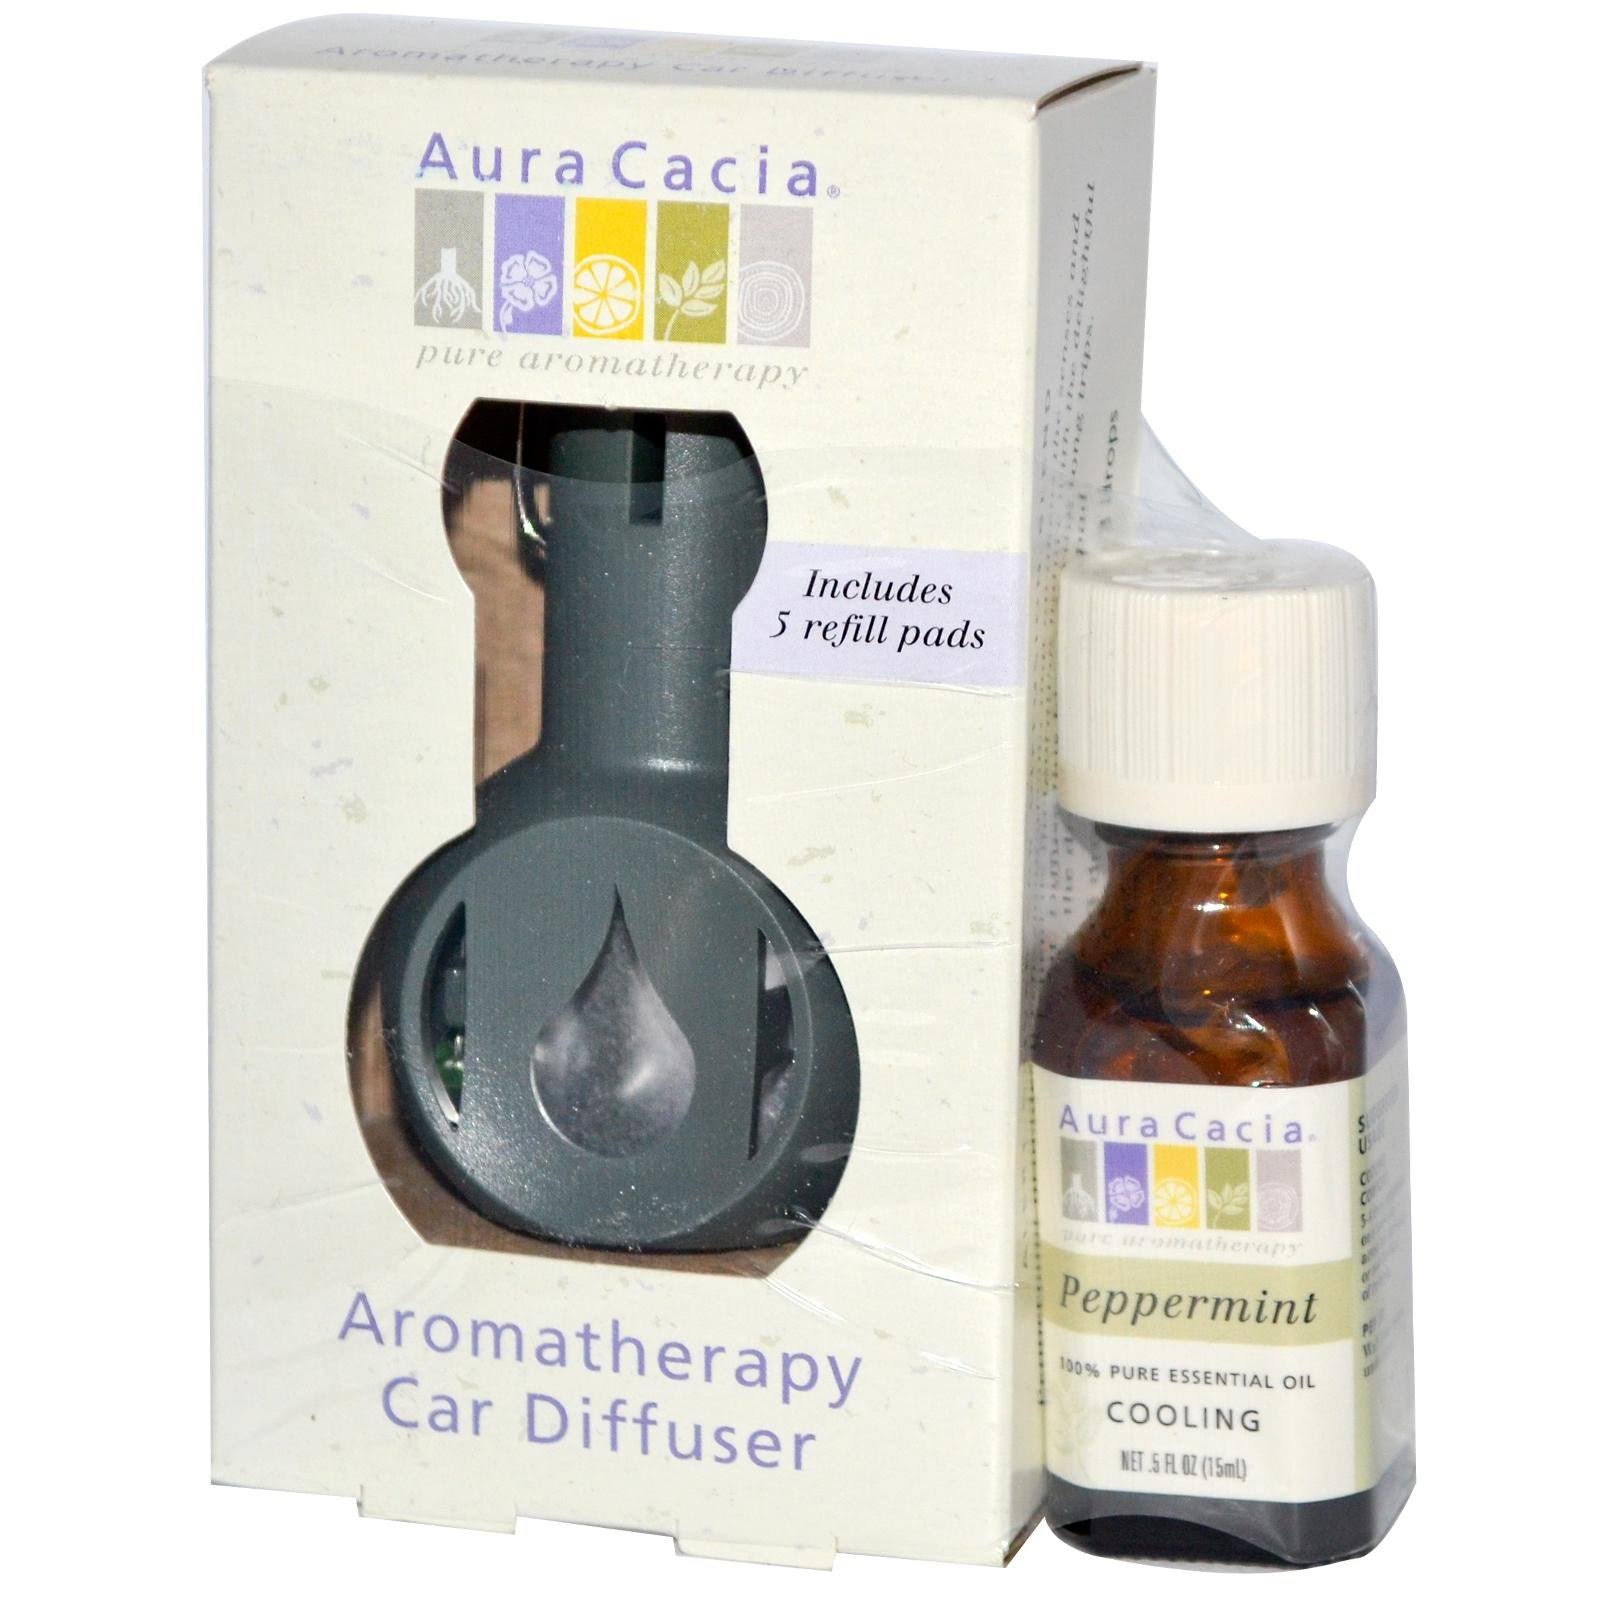 Aura Cacia Aromatherapy Car Diffuser - With Peppermint Oil